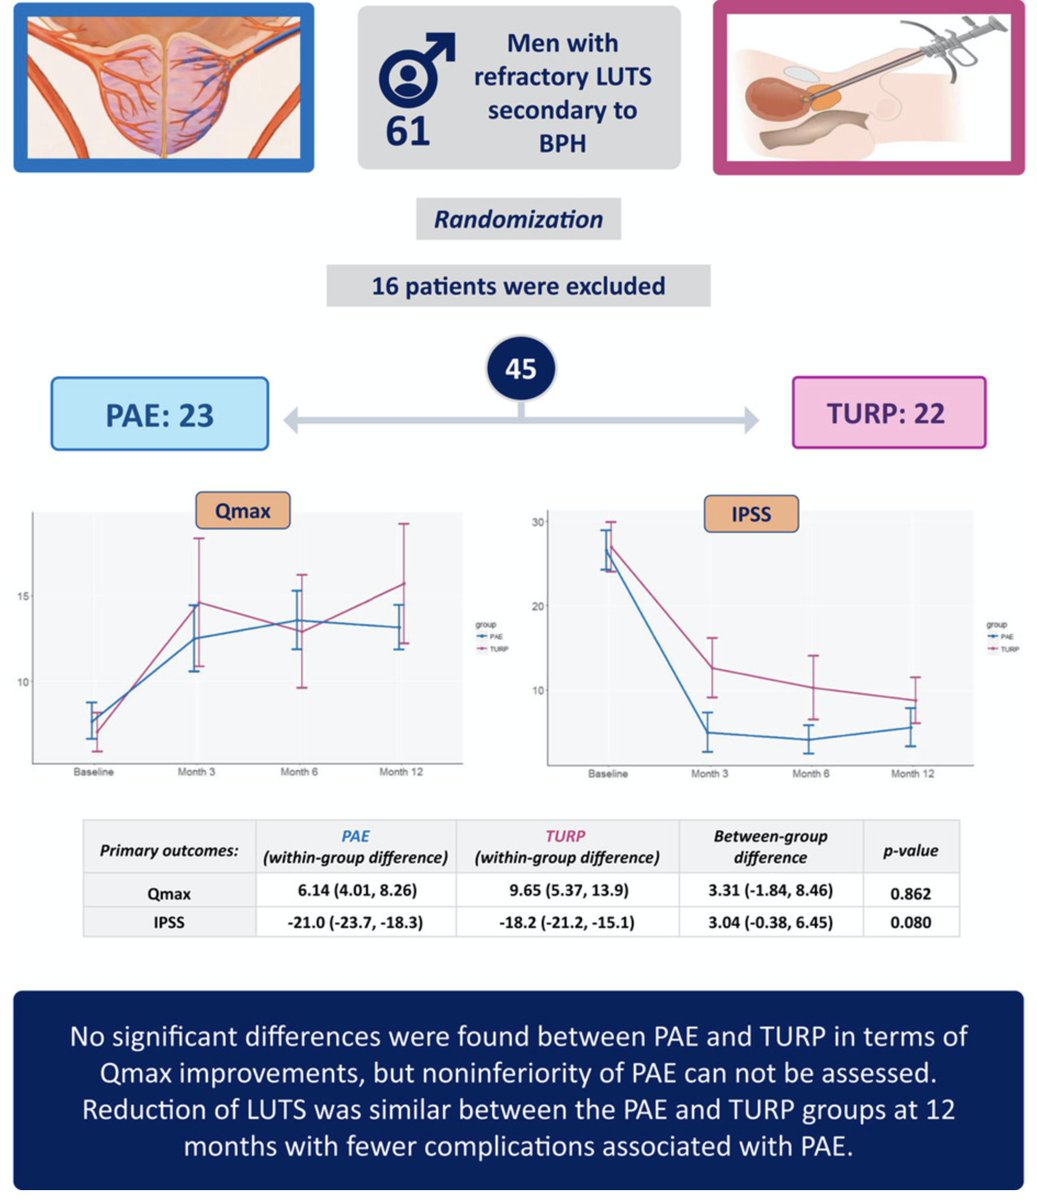 #PAE is an option for men with LUTS. Nice study demonstrating improvement in LUTS after #PAE with similar outcomes to TURP at 1 year. Strong work @Nafarrorum @AriIsaacsonMD @JVIRmedia. doi.org/10.1016/j.jvir…